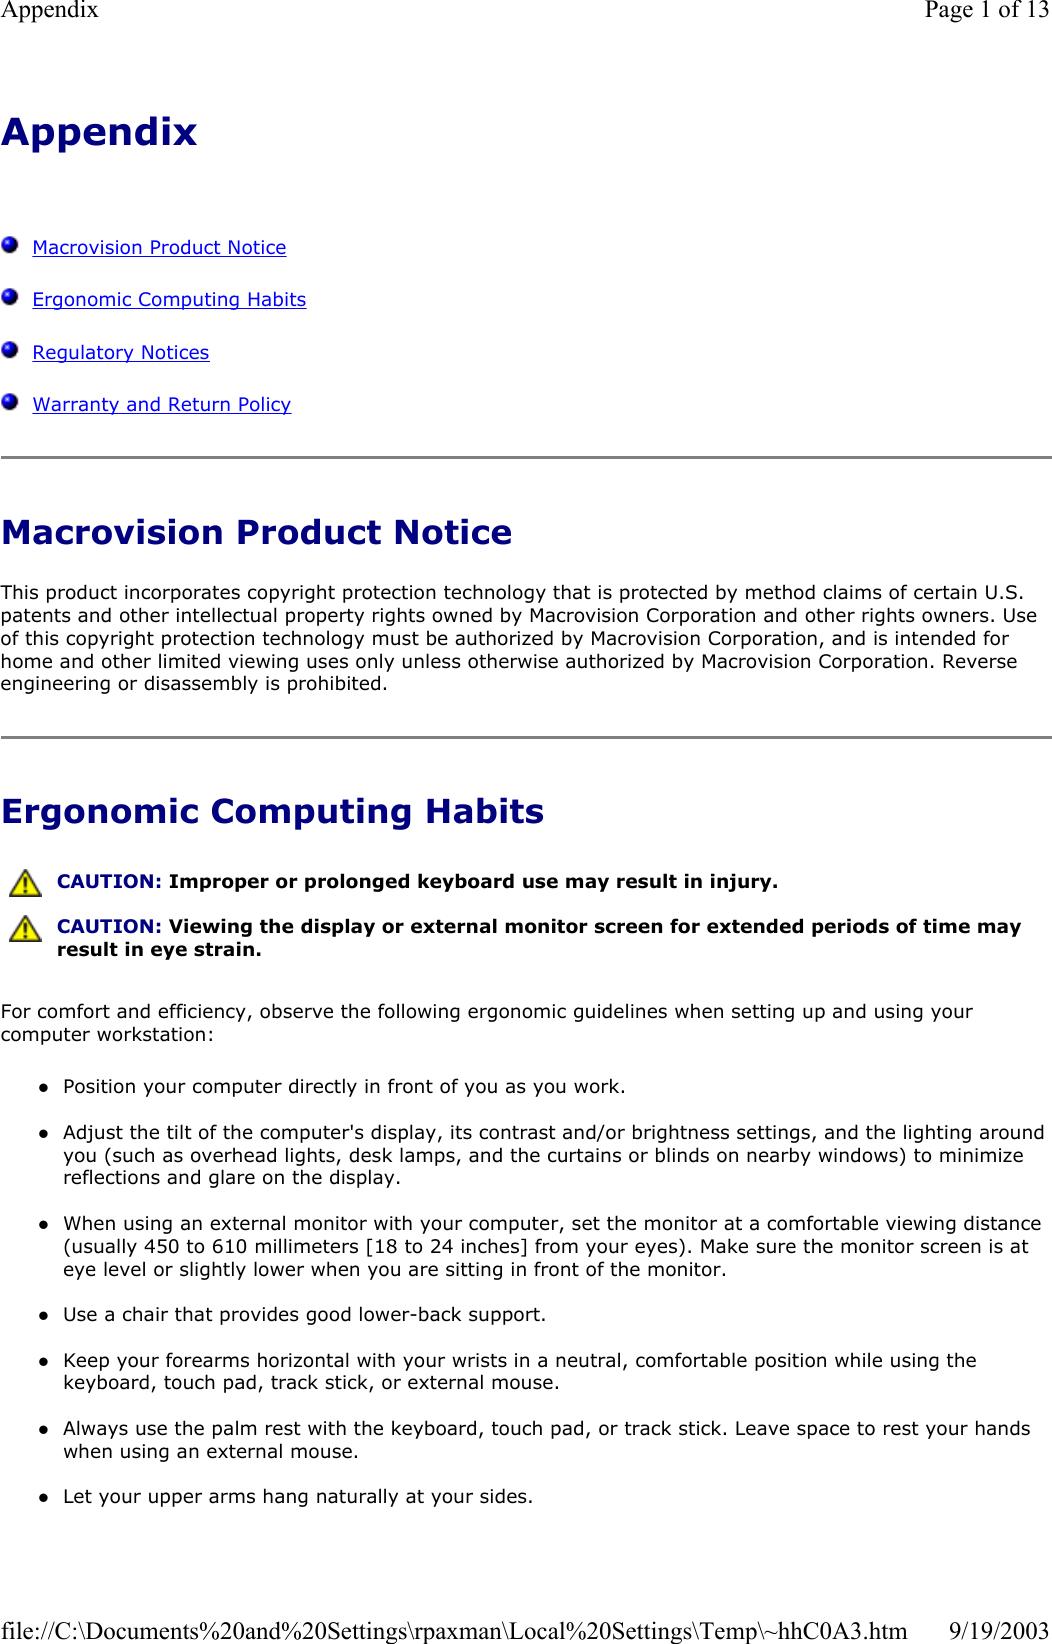 Appendix      Macrovision Product Notice   Ergonomic Computing Habits   Regulatory Notices   Warranty and Return Policy Macrovision Product Notice This product incorporates copyright protection technology that is protected by method claims of certain U.S. patents and other intellectual property rights owned by Macrovision Corporation and other rights owners. Use of this copyright protection technology must be authorized by Macrovision Corporation, and is intended for home and other limited viewing uses only unless otherwise authorized by Macrovision Corporation. Reverse engineering or disassembly is prohibited. Ergonomic Computing Habits For comfort and efficiency, observe the following ergonomic guidelines when setting up and using your computer workstation: zPosition your computer directly in front of you as you work.  zAdjust the tilt of the computer&apos;s display, its contrast and/or brightness settings, and the lighting around you (such as overhead lights, desk lamps, and the curtains or blinds on nearby windows) to minimize reflections and glare on the display.  zWhen using an external monitor with your computer, set the monitor at a comfortable viewing distance (usually 450 to 610 millimeters [18 to 24 inches] from your eyes). Make sure the monitor screen is at eye level or slightly lower when you are sitting in front of the monitor.   zUse a chair that provides good lower-back support.  zKeep your forearms horizontal with your wrists in a neutral, comfortable position while using the keyboard, touch pad, track stick, or external mouse.  zAlways use the palm rest with the keyboard, touch pad, or track stick. Leave space to rest your hands when using an external mouse.  zLet your upper arms hang naturally at your sides.   CAUTION: Improper or prolonged keyboard use may result in injury.  CAUTION: Viewing the display or external monitor screen for extended periods of time may result in eye strain. Page 1 of 13Appendix9/19/2003file://C:\Documents%20and%20Settings\rpaxman\Local%20Settings\Temp\~hhC0A3.htm